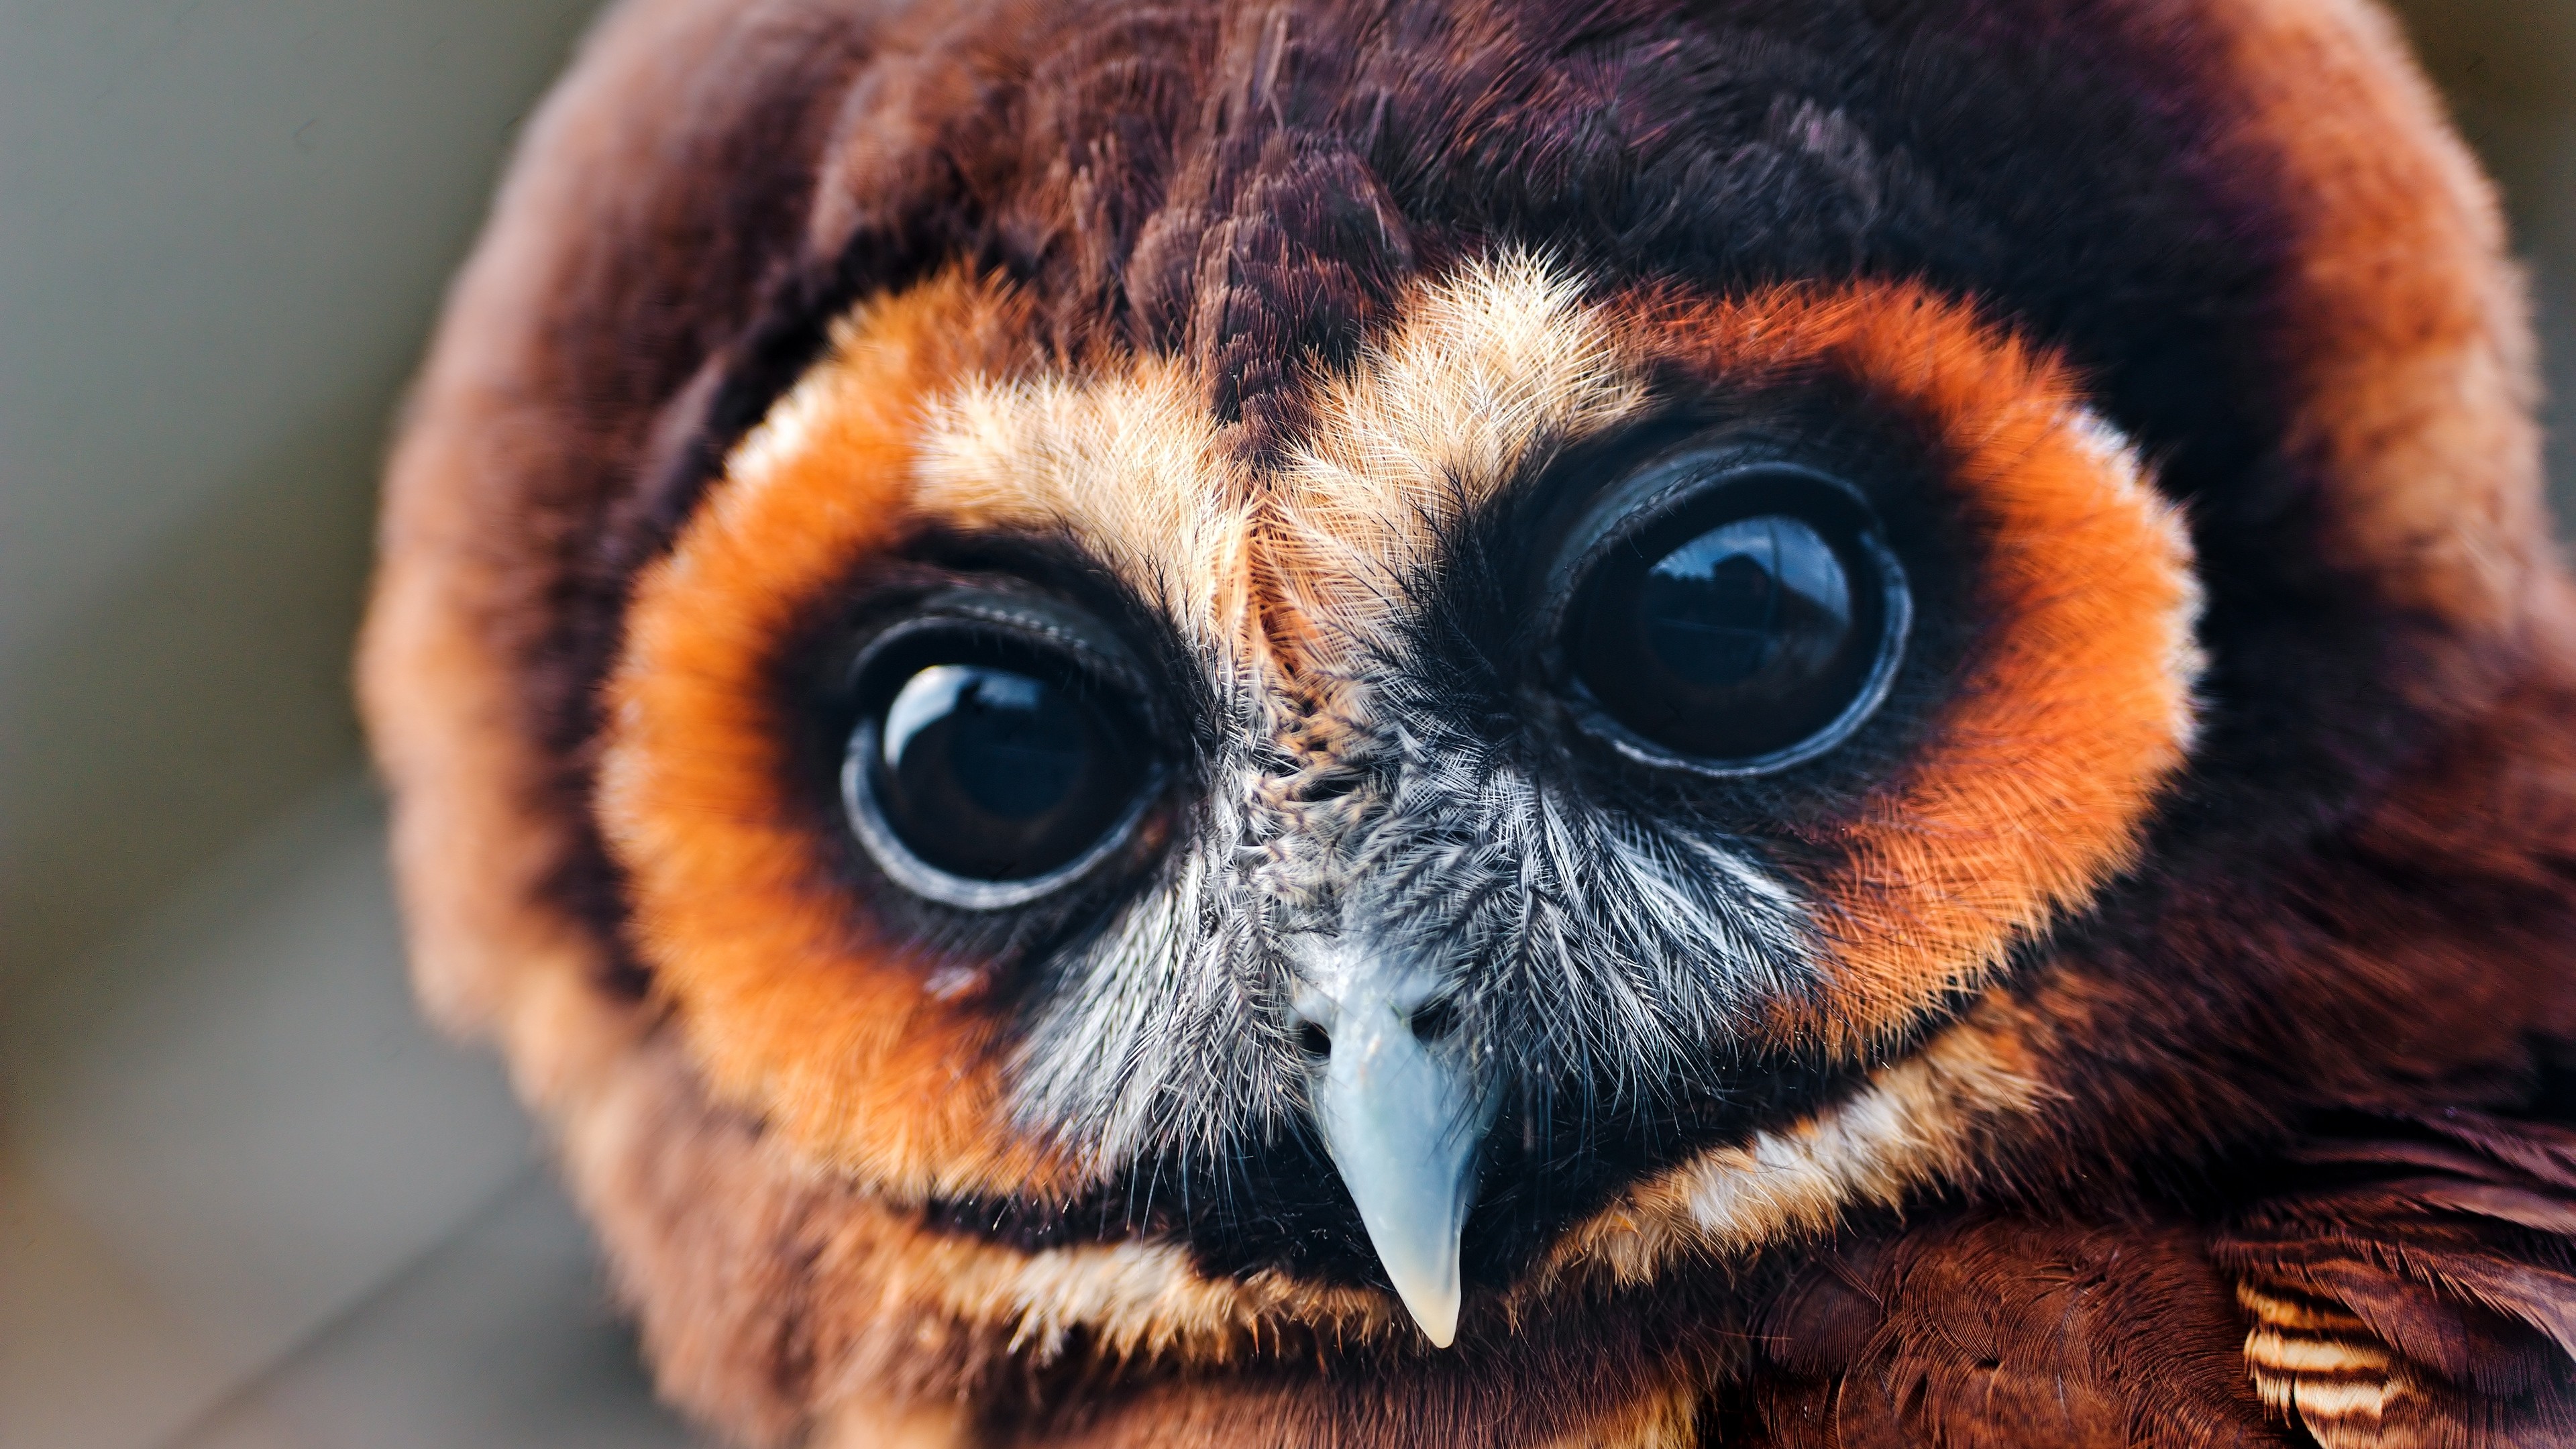 3840x2160  Wallpaper owl, baby, muzzle, eyes, feathers